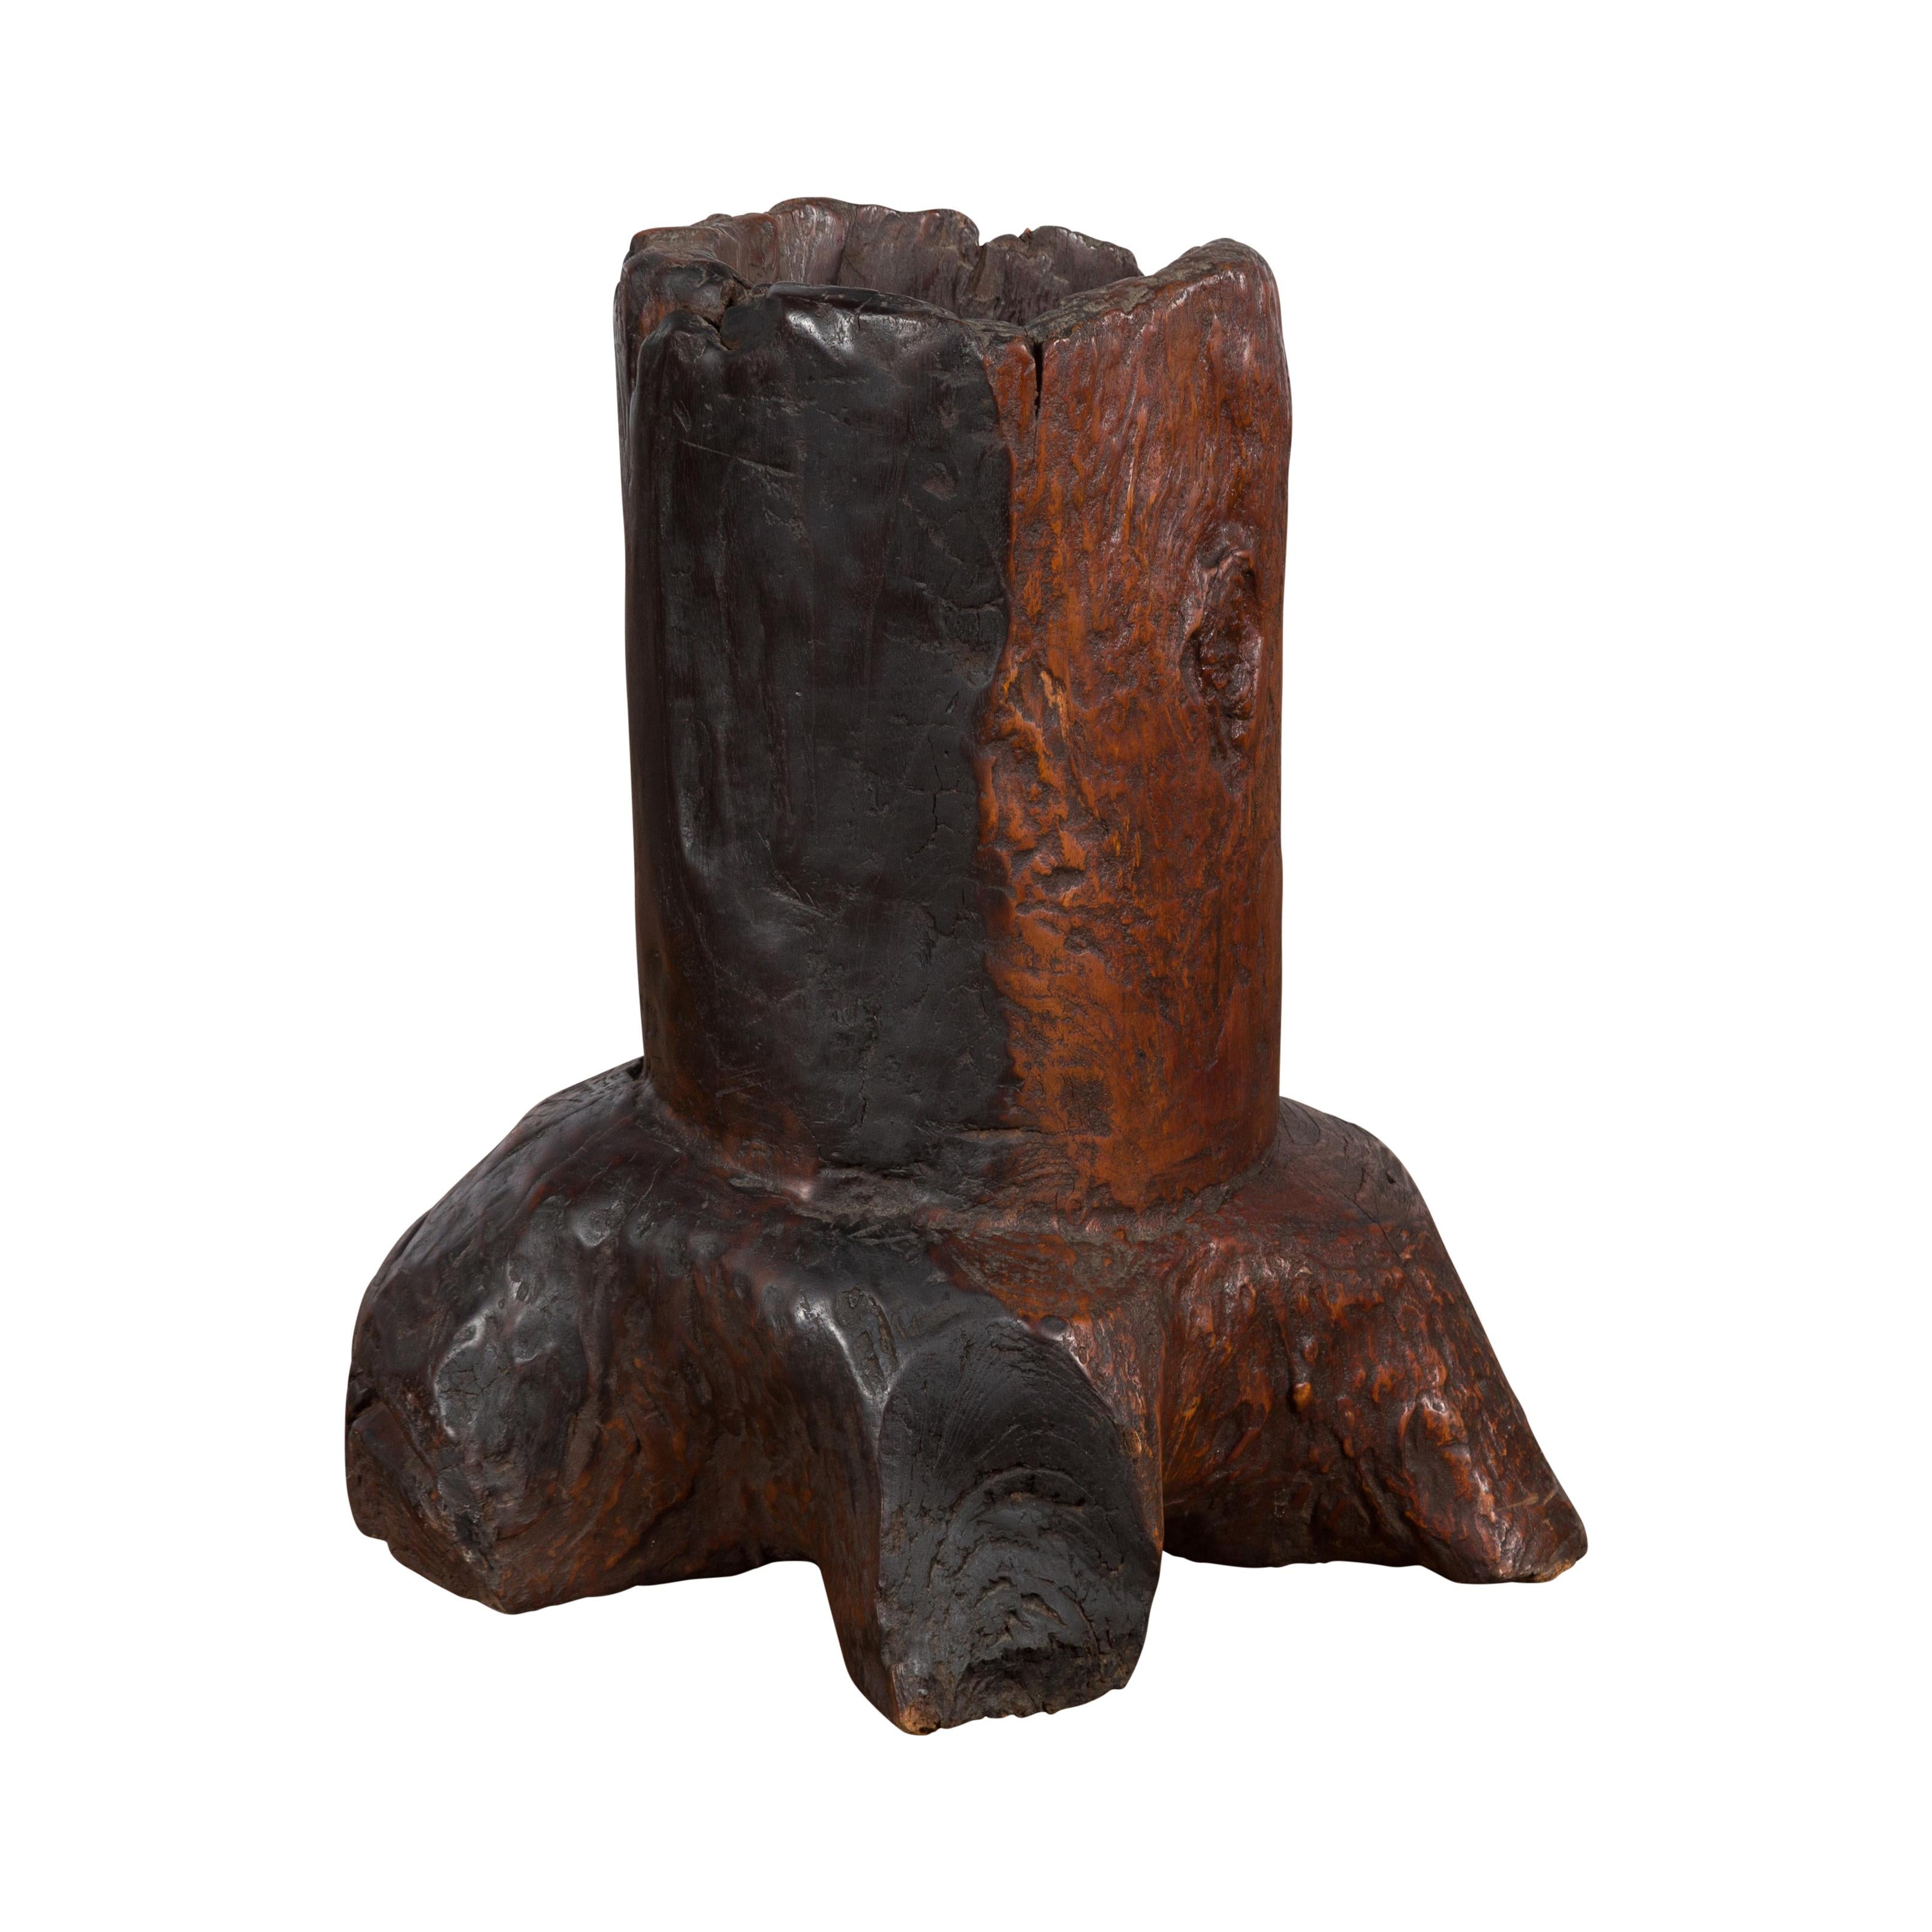 A Primitive teak wood Folk style wooden tree trunk mortar from the 19th century with distressed appearance, ideal to be used as a rustic planter. Created in Asia possibly during the 19th century, this teak wood piece attracts our attention with its